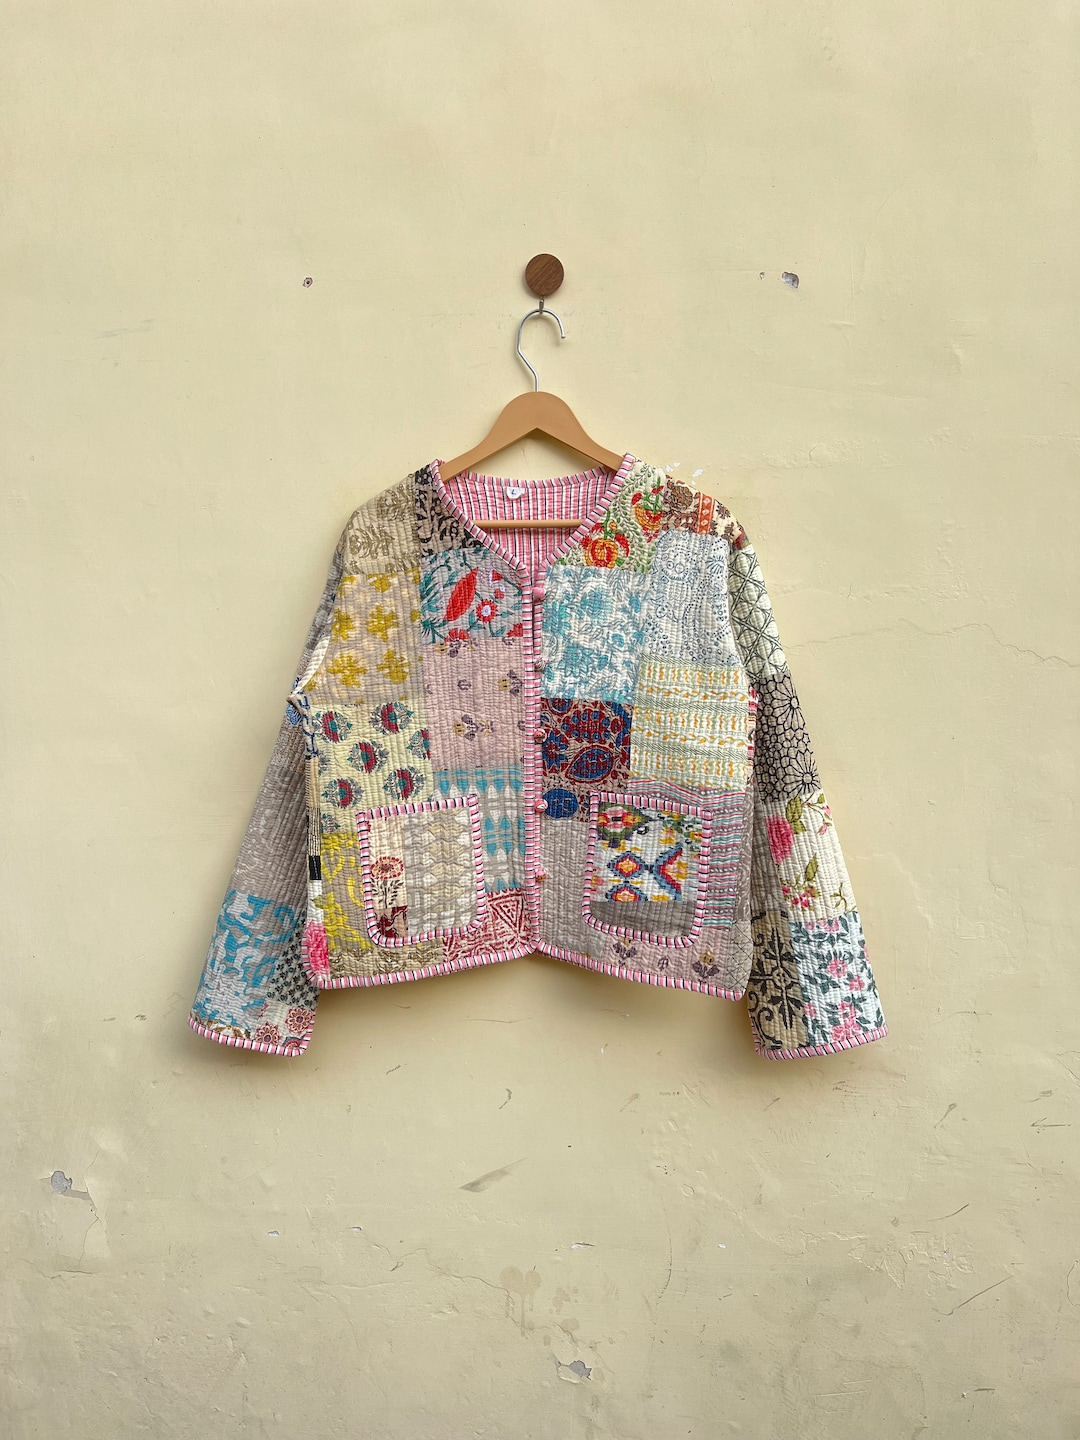 Cotton Patch Work Jacket Quilted Kantha Coat Front Pocket Handmade ...